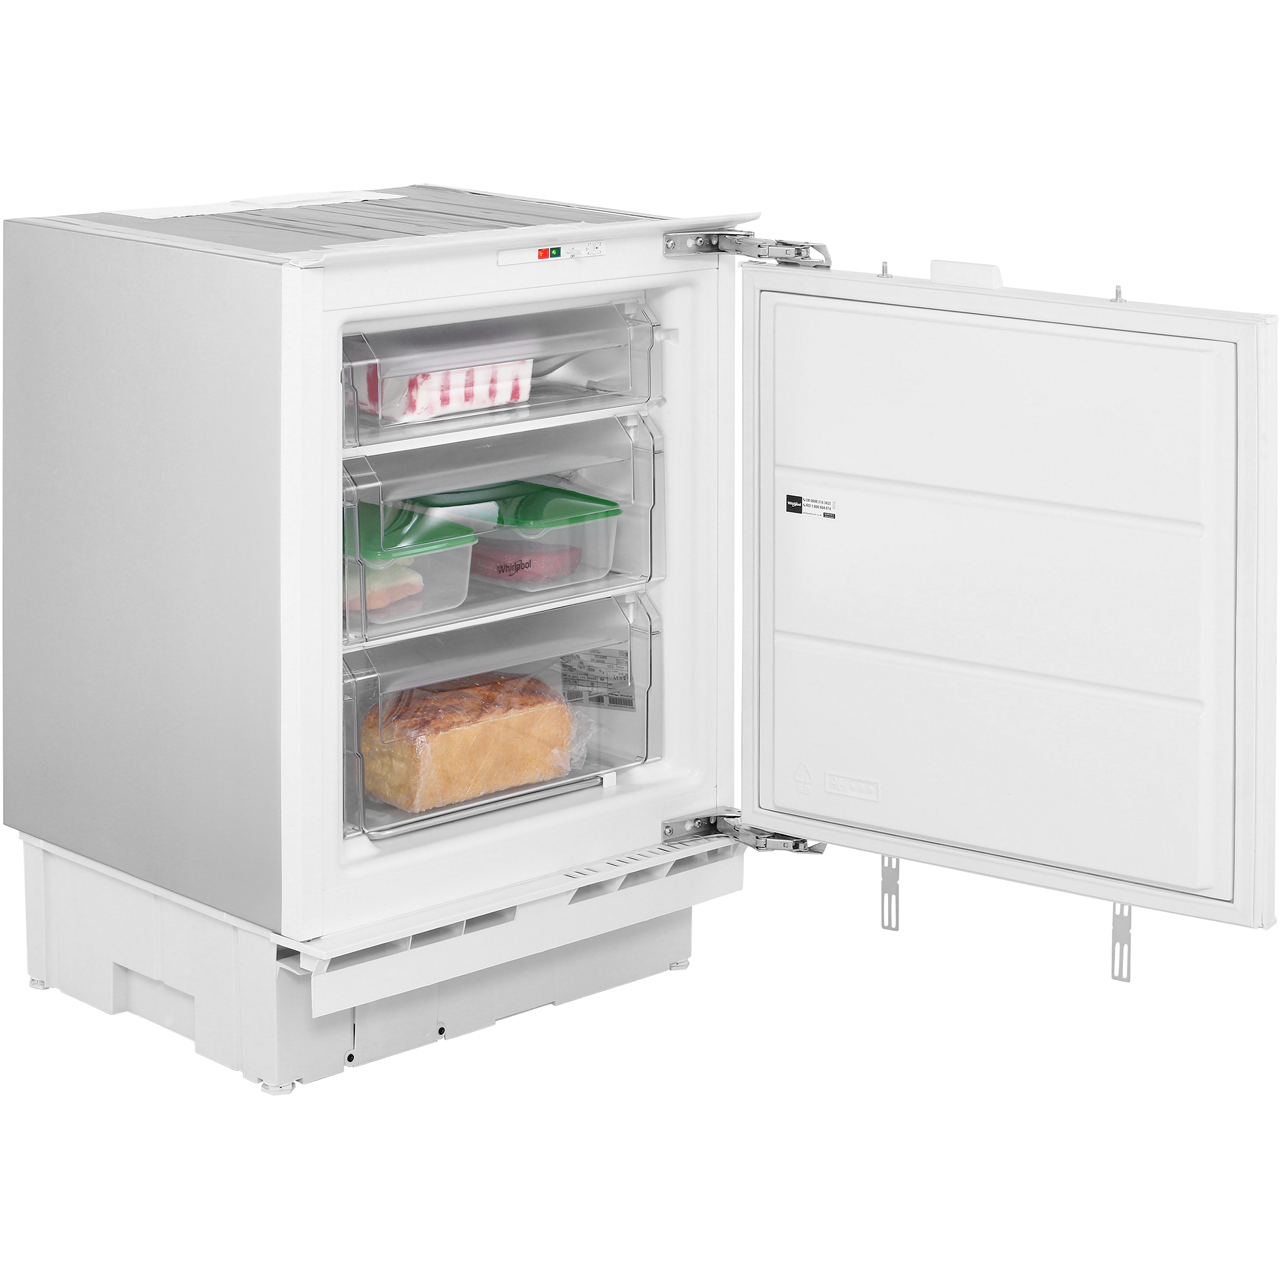 Whirlpool AFB91/A+/FR.1 Integrated Under Counter Freezer with Fixed Door Fixing Kit Review